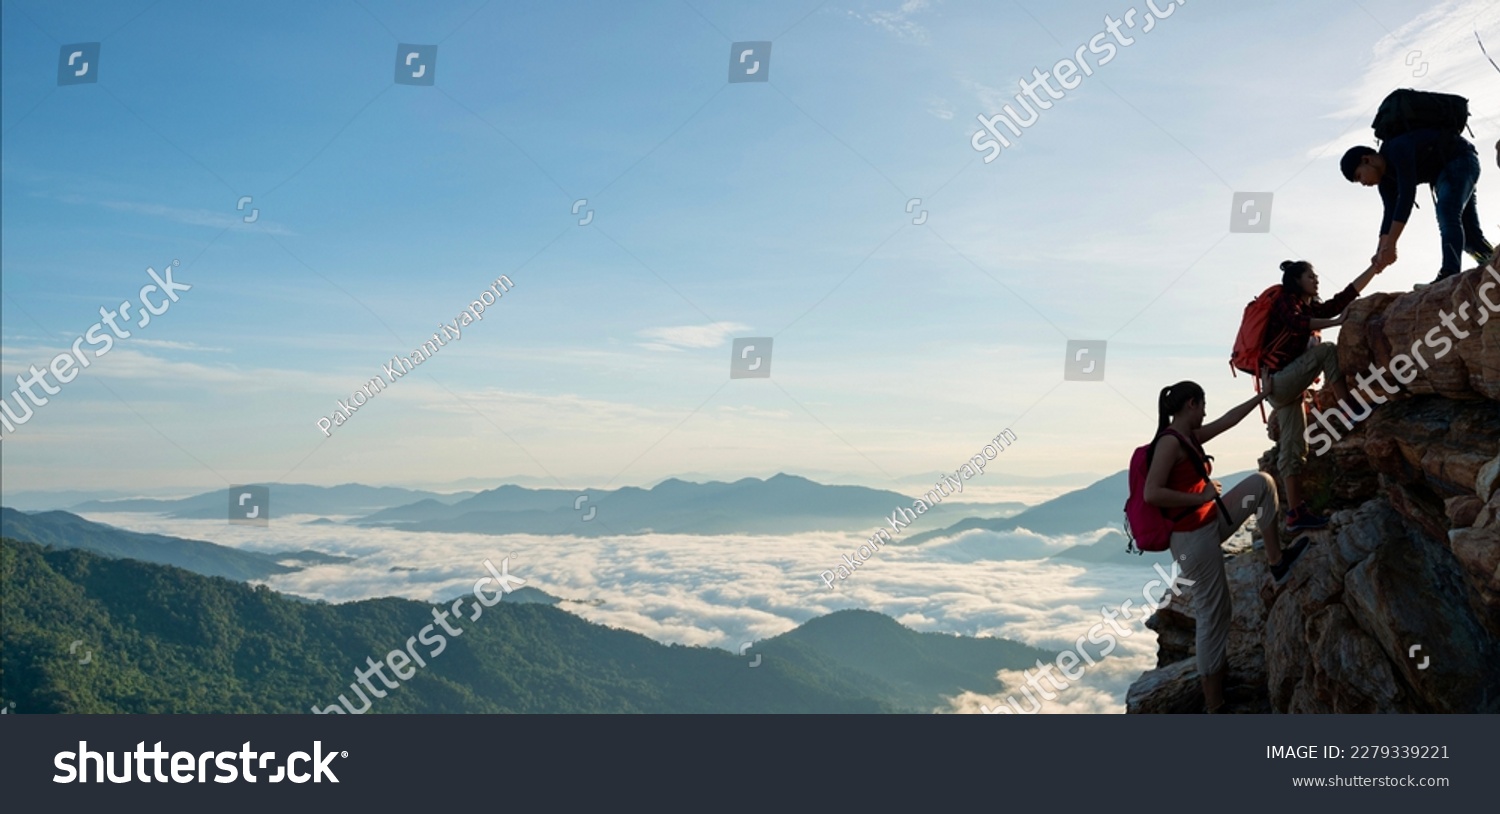 Asian hiking help each other on mountains view . teamwork concept #2279339221